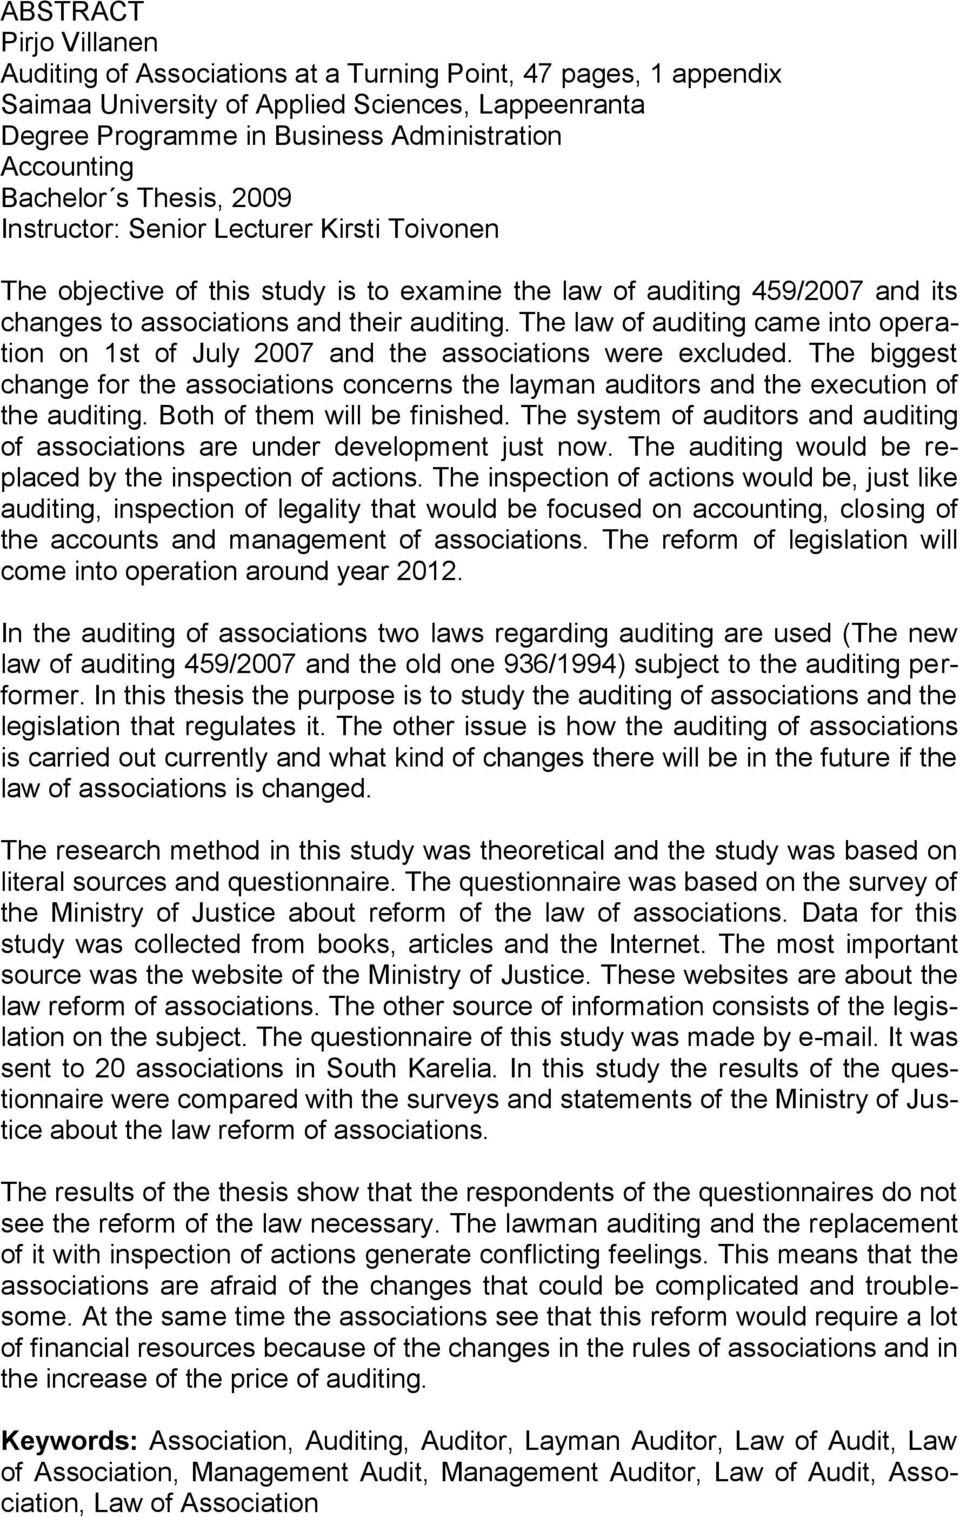 The law of auditing came into operation on 1st of July 2007 and the associations were excluded. The biggest change for the associations concerns the layman auditors and the execution of the auditing.